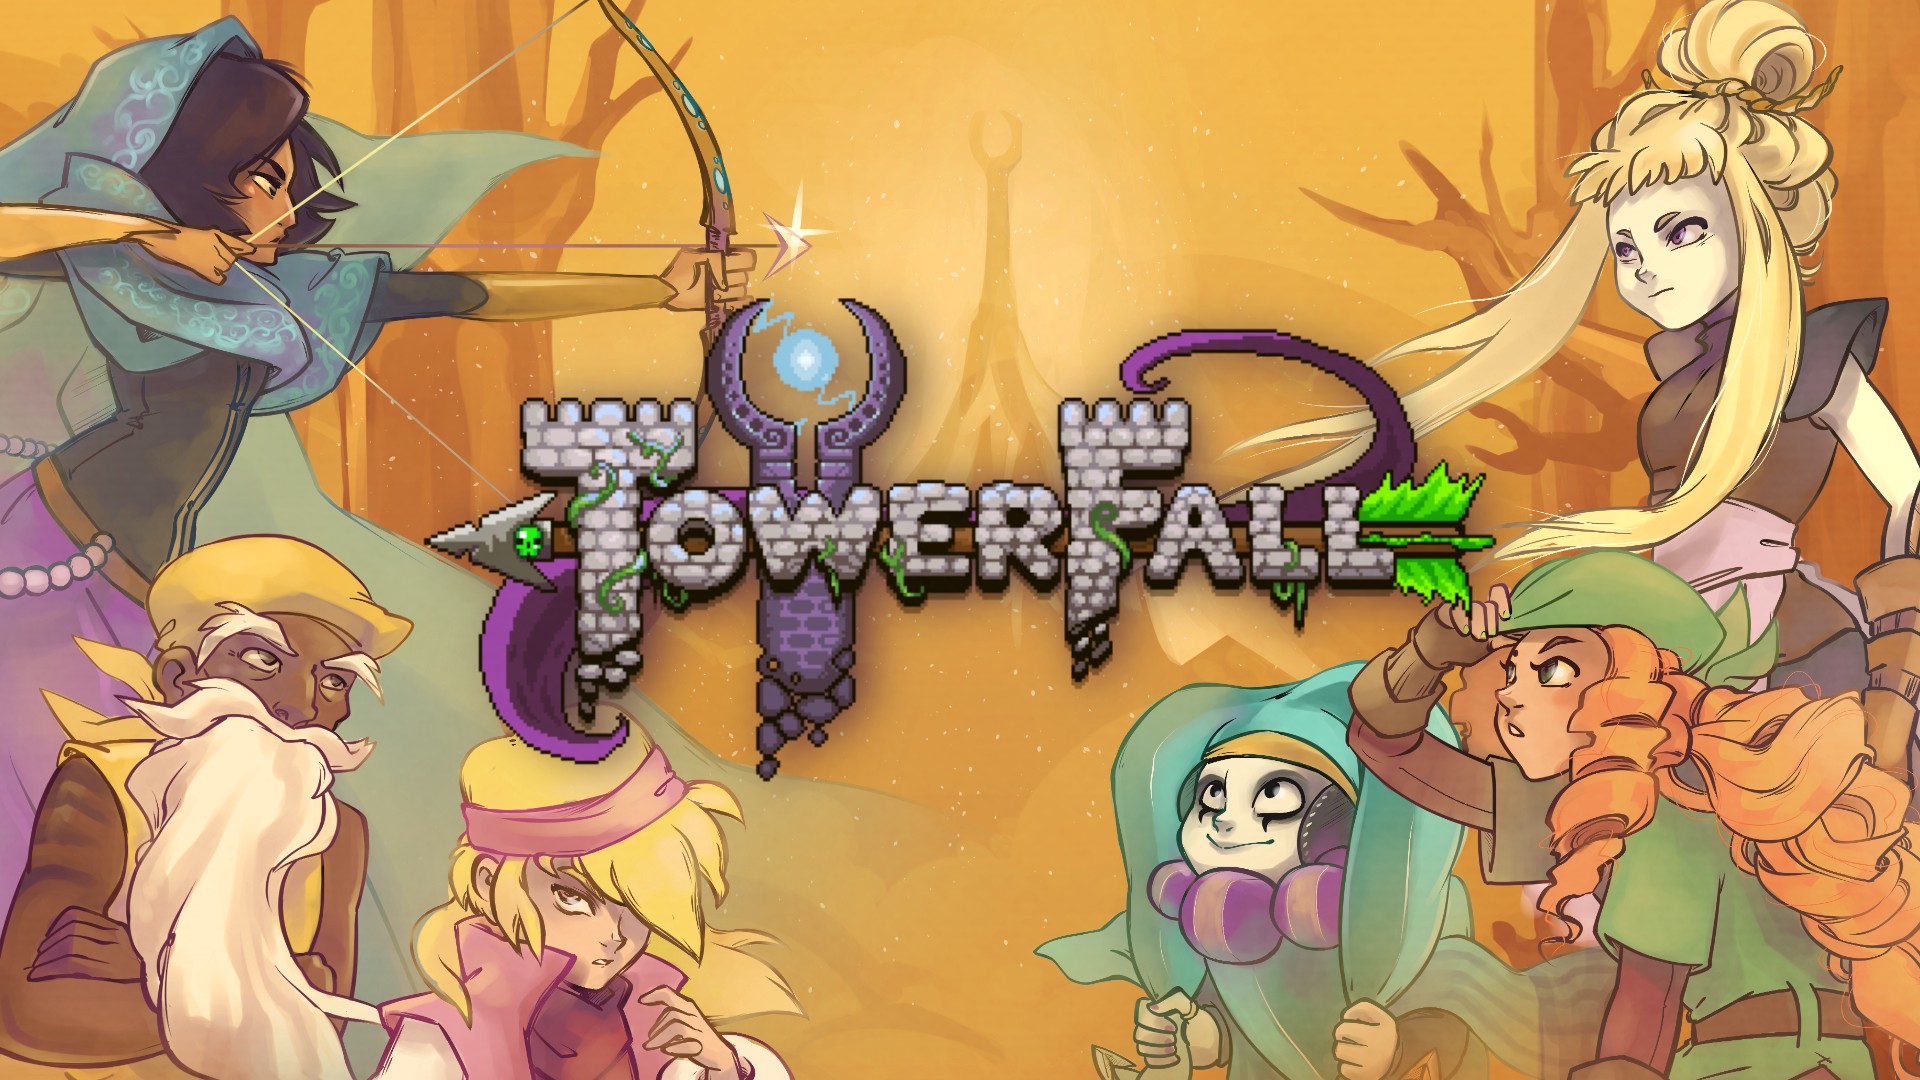 Towerfall Is Expected To Be The Best Multiplayer Game On Nintendo Switch